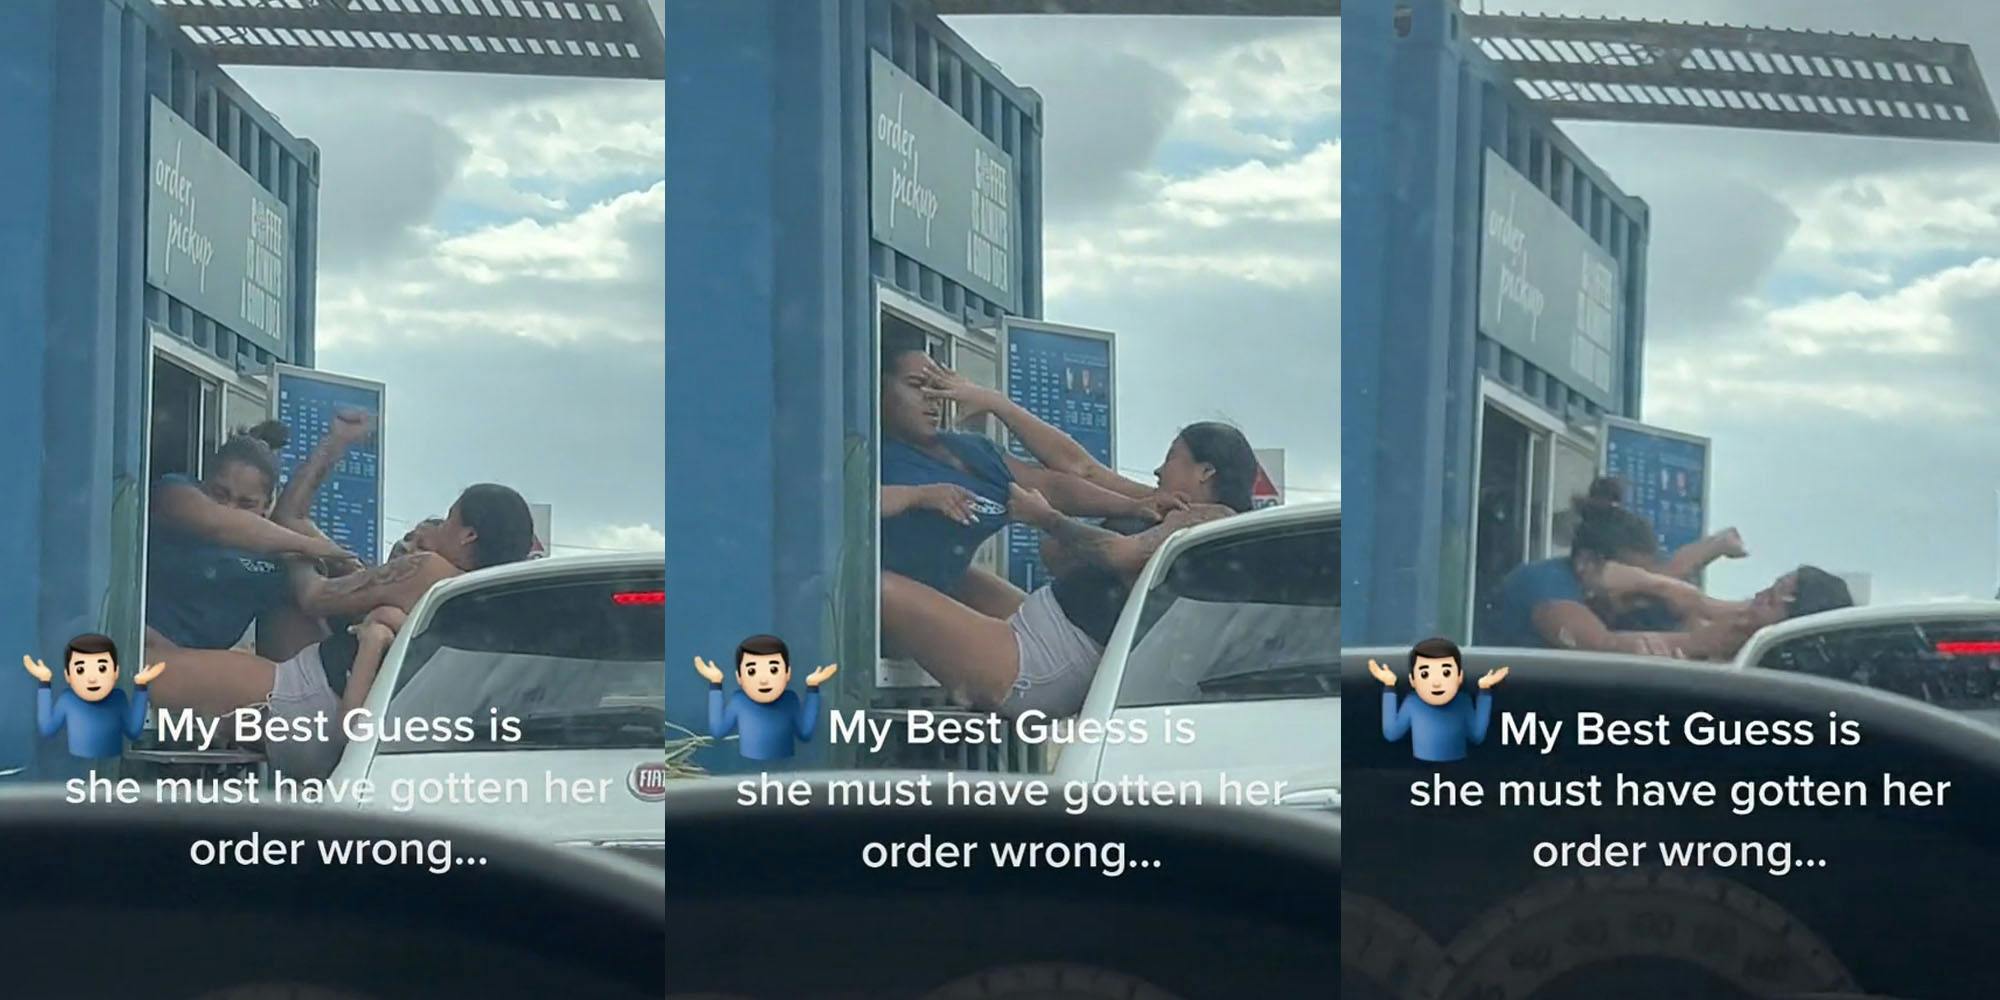 recording from car woman out of window hitting worker worker grabbing womans arm caption 'My Best Guess is she must have gotten her order wrong...' (l) recording from car woman out of car window legs going into worker window hand on workers face caption 'My Best Guess is she must have gotten her order wrong...' (c) recording from car woman punching worker from car window caption 'My Best Guess is she must have gotten her order wrong...' (r)